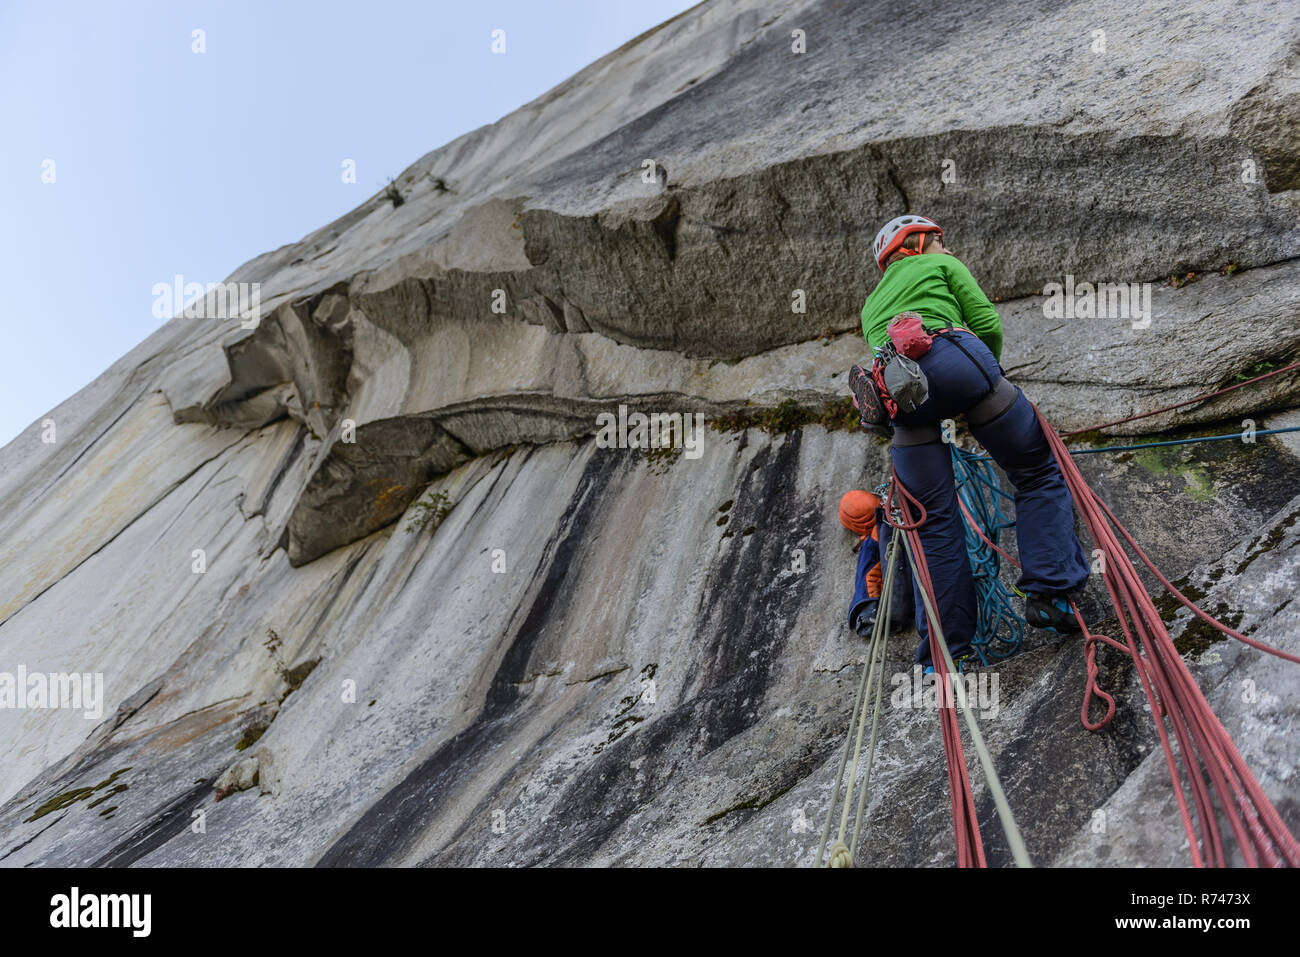 Young female rock climber climbing rock face, low angle view, le Chef, Squamish, British Columbia, Canada Banque D'Images